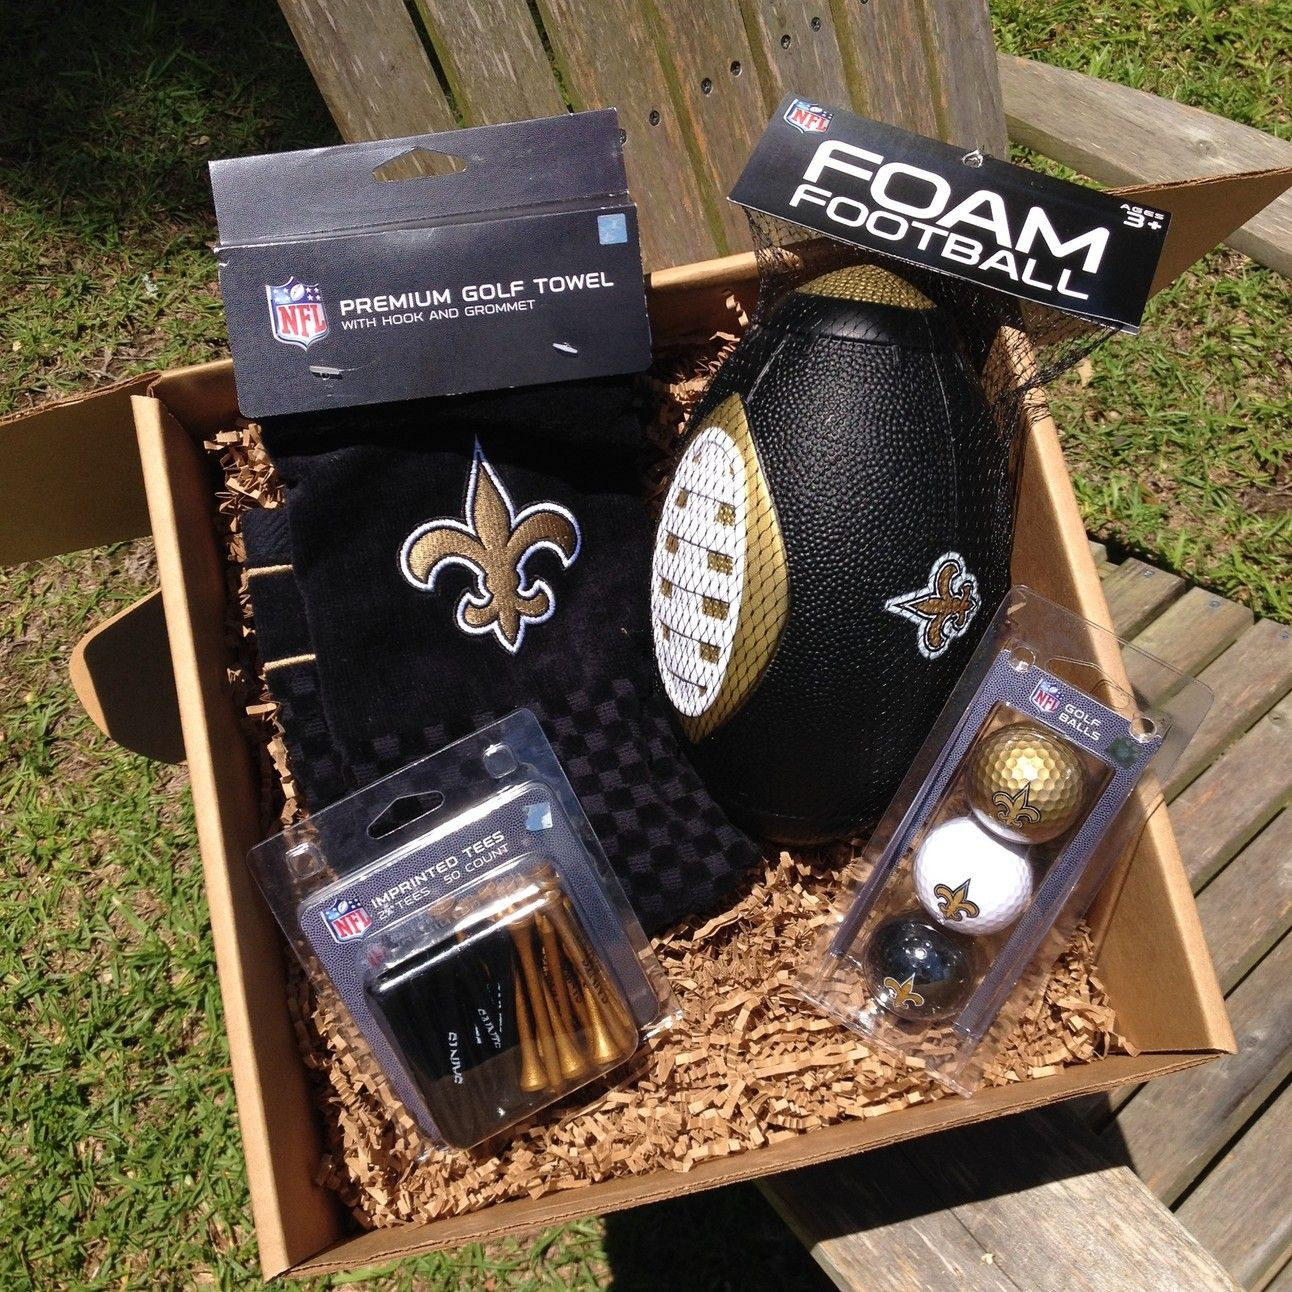 Super Bowl Gift Basket Ideas
 New Orleans Saints Gift Box from GO CELEBRATE GIFT BASKETS